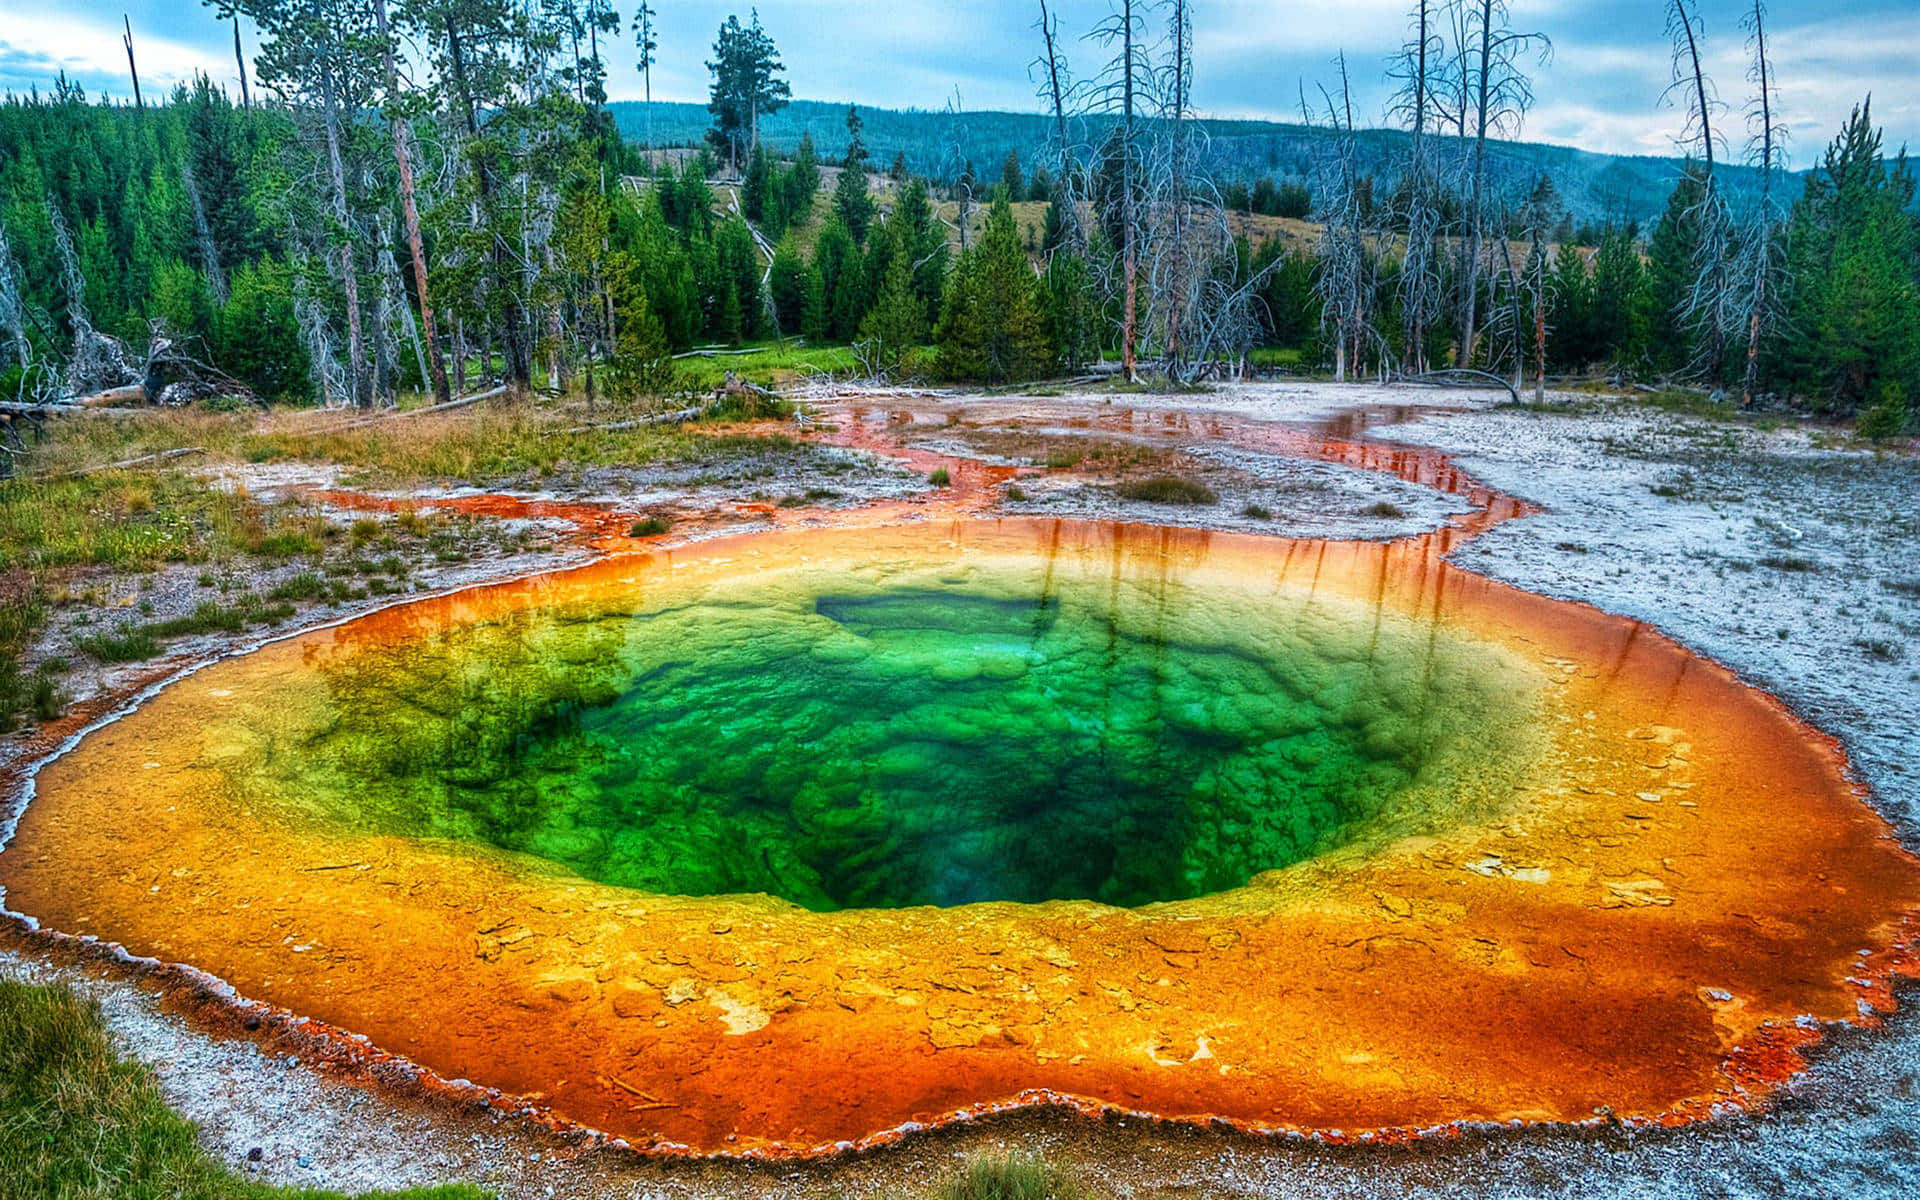 100+] Yellowstone National Park Background s 